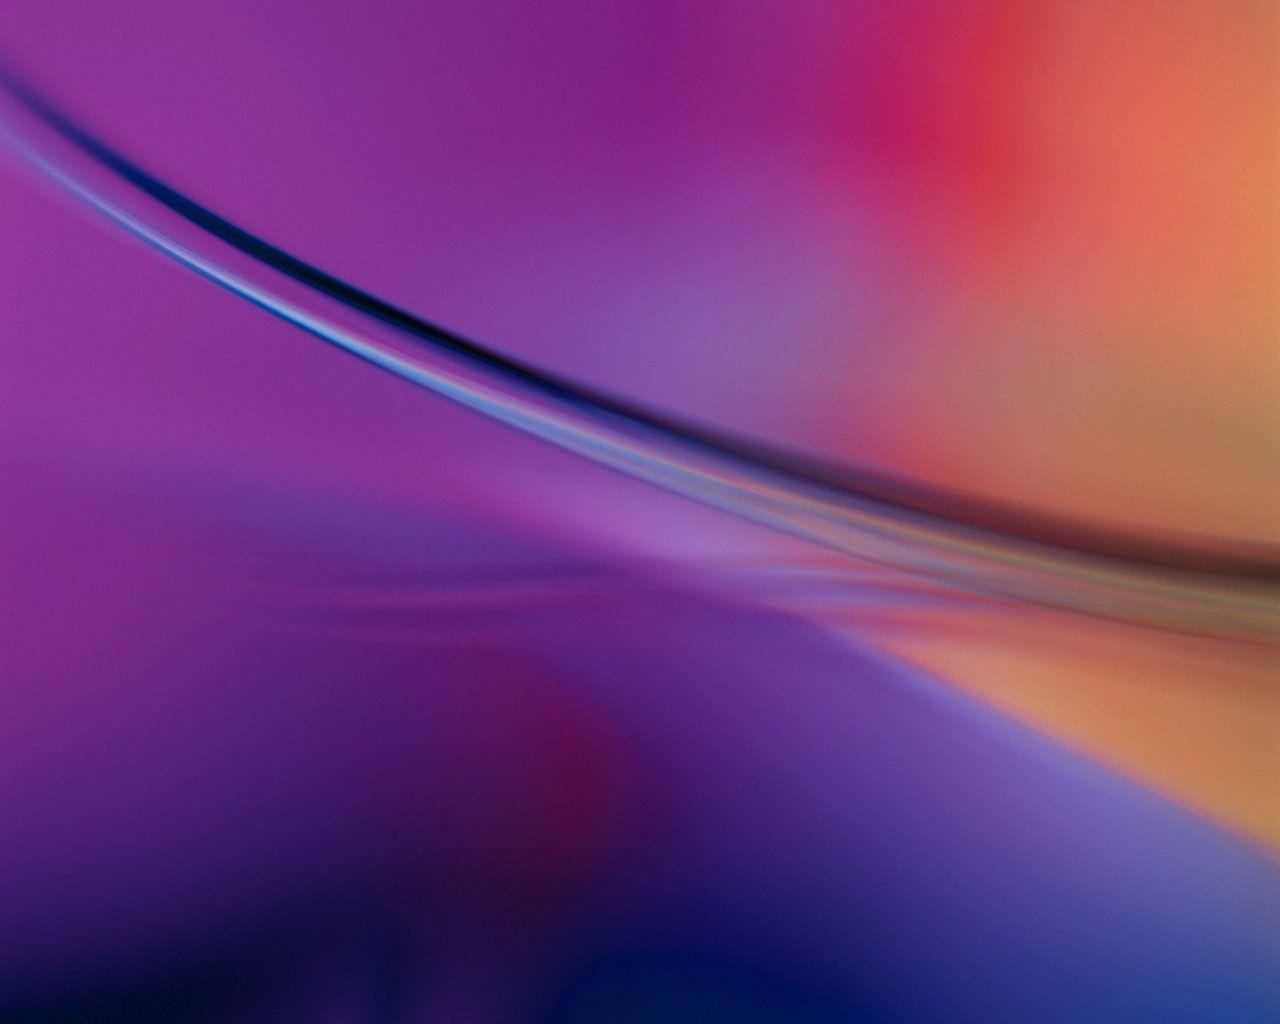 Desktop Wallpaper · Gallery · Computers · Abstract Background free